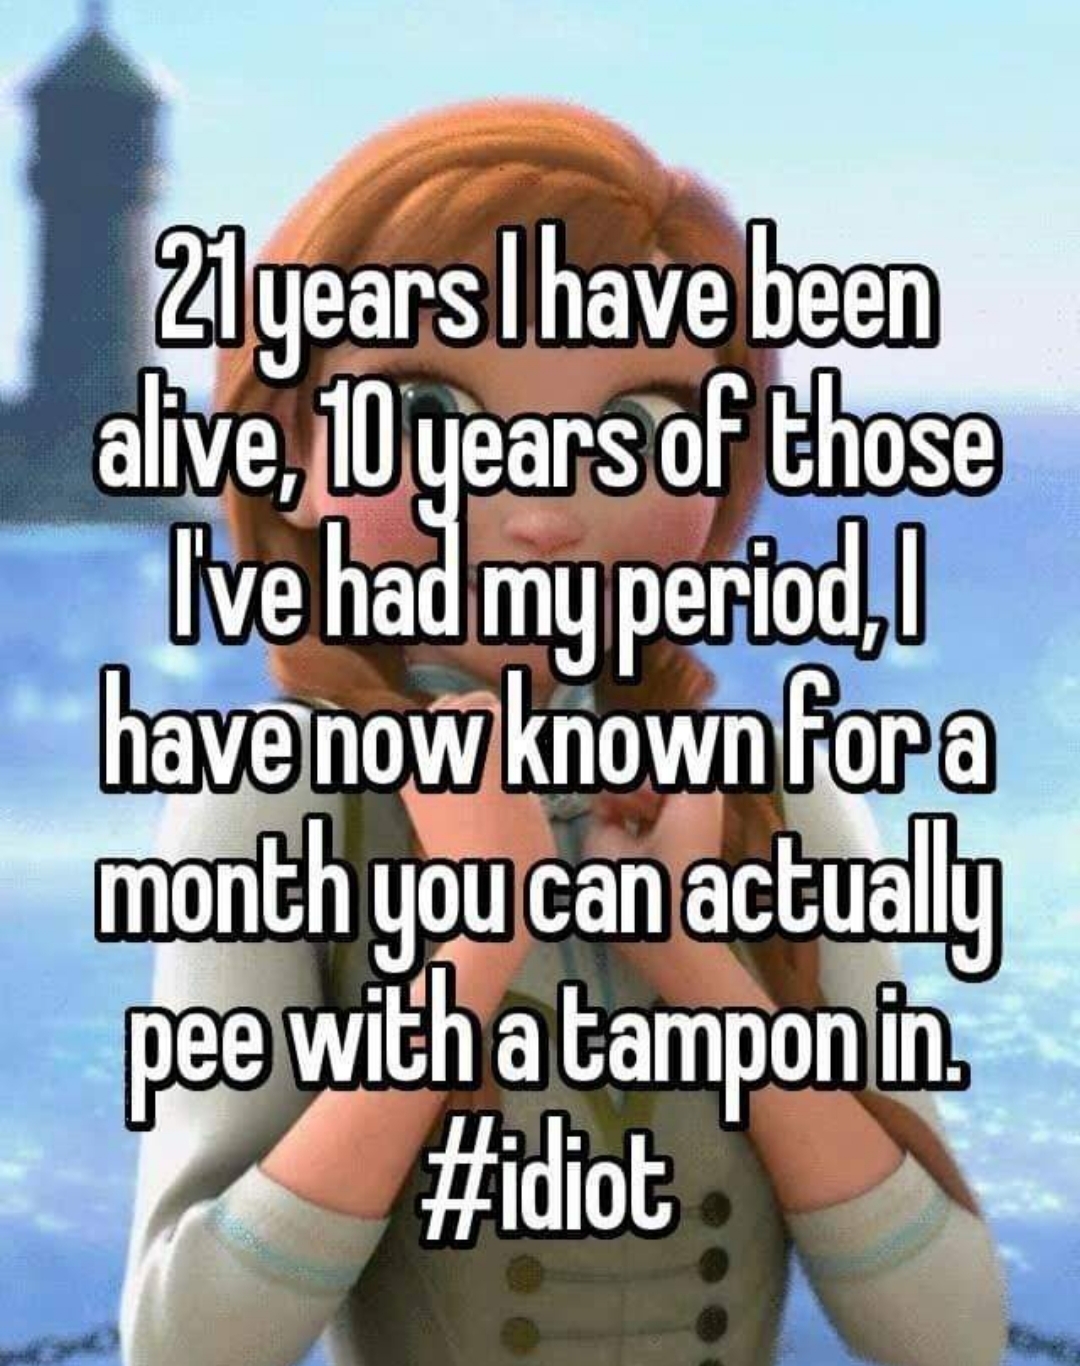 women have high standards meme - 21 years have been alive, 10 years of those Ive had my period, have now known fora month you can actually pee with a tampon in